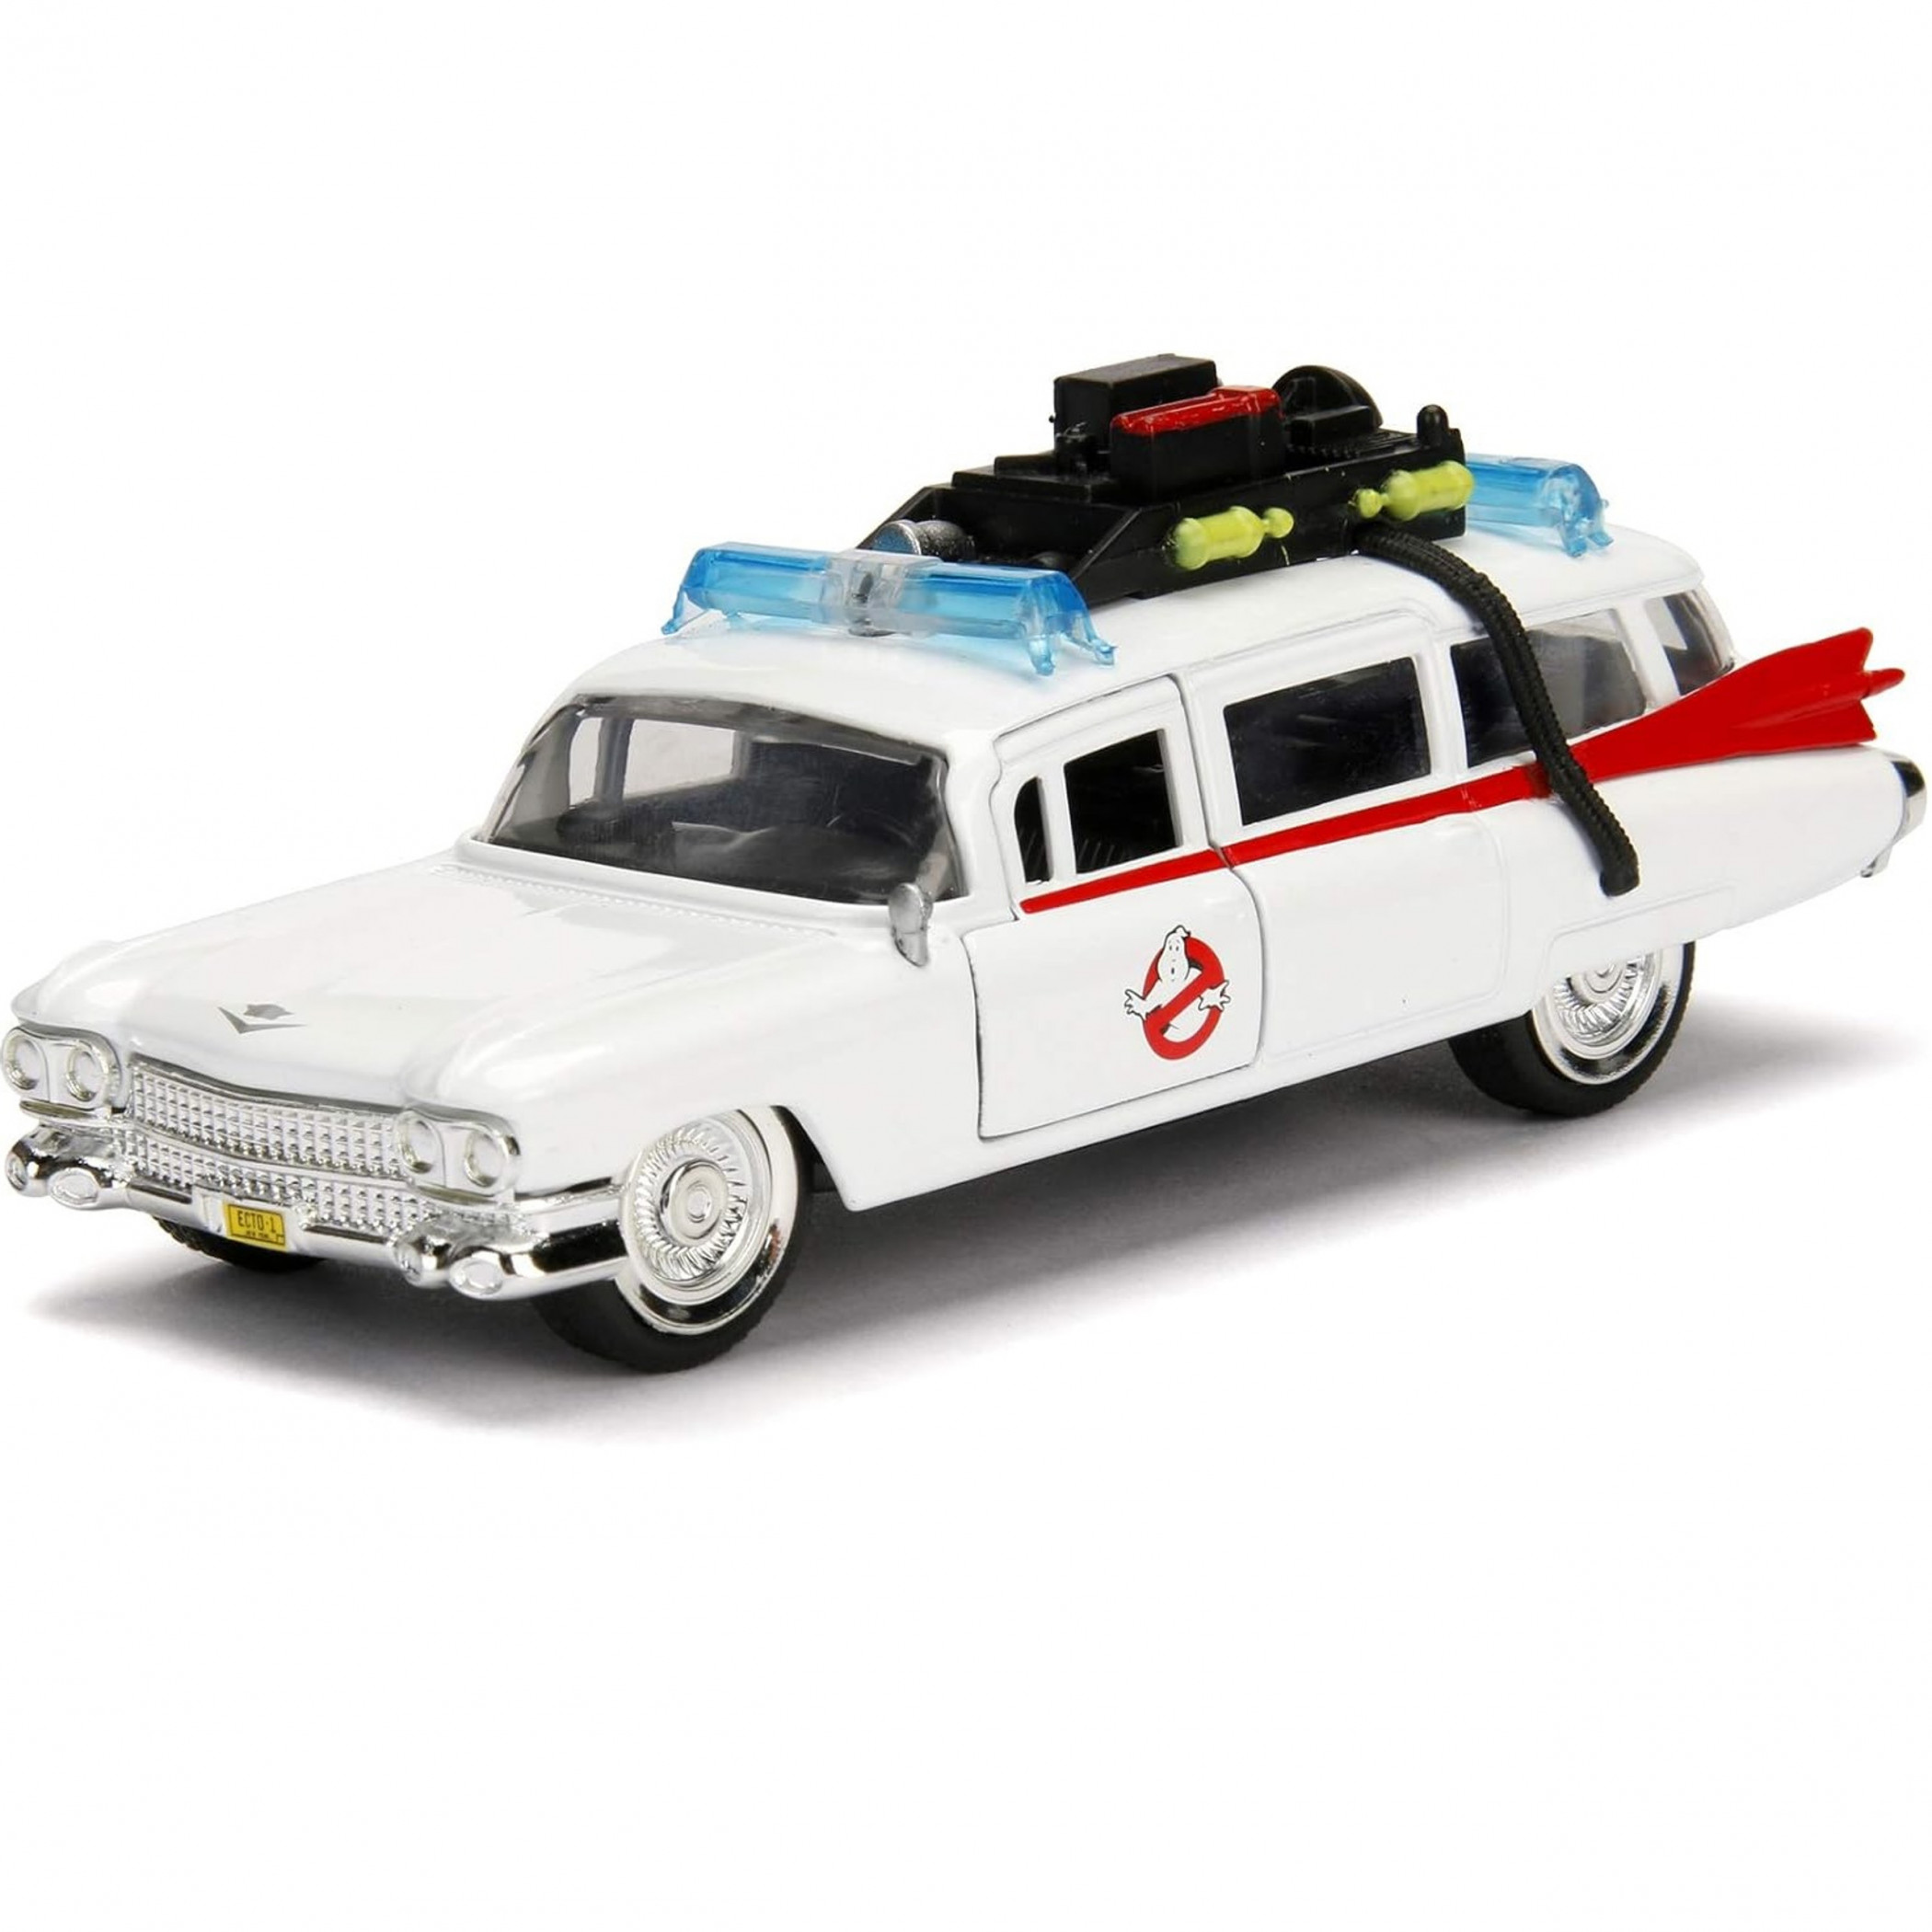 Ghostbusters ECTO-1 Die-Cast Car 1:32 Scale by Jada Toys